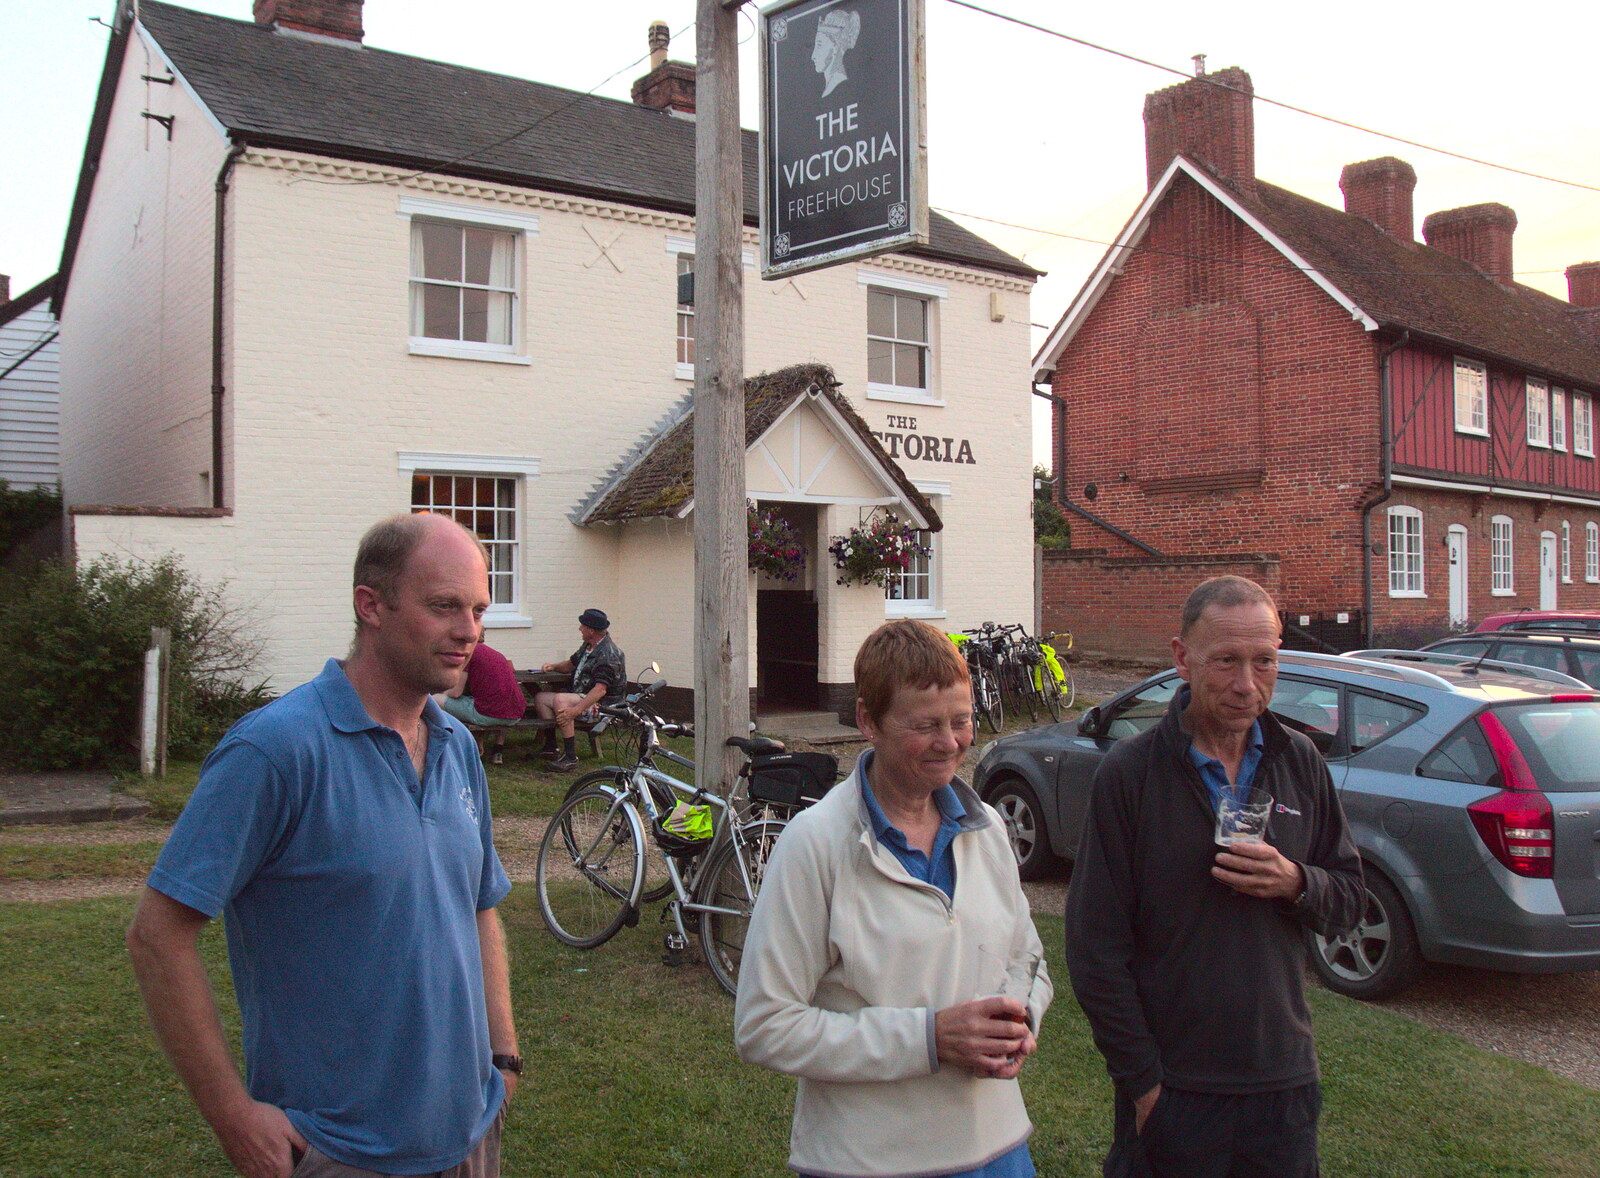 Paul, Pippa and Apple outside the Victoria from The BSCC at the Victoria and The Grain Beer Festival, Diss, Norfolk - 8th July 2017